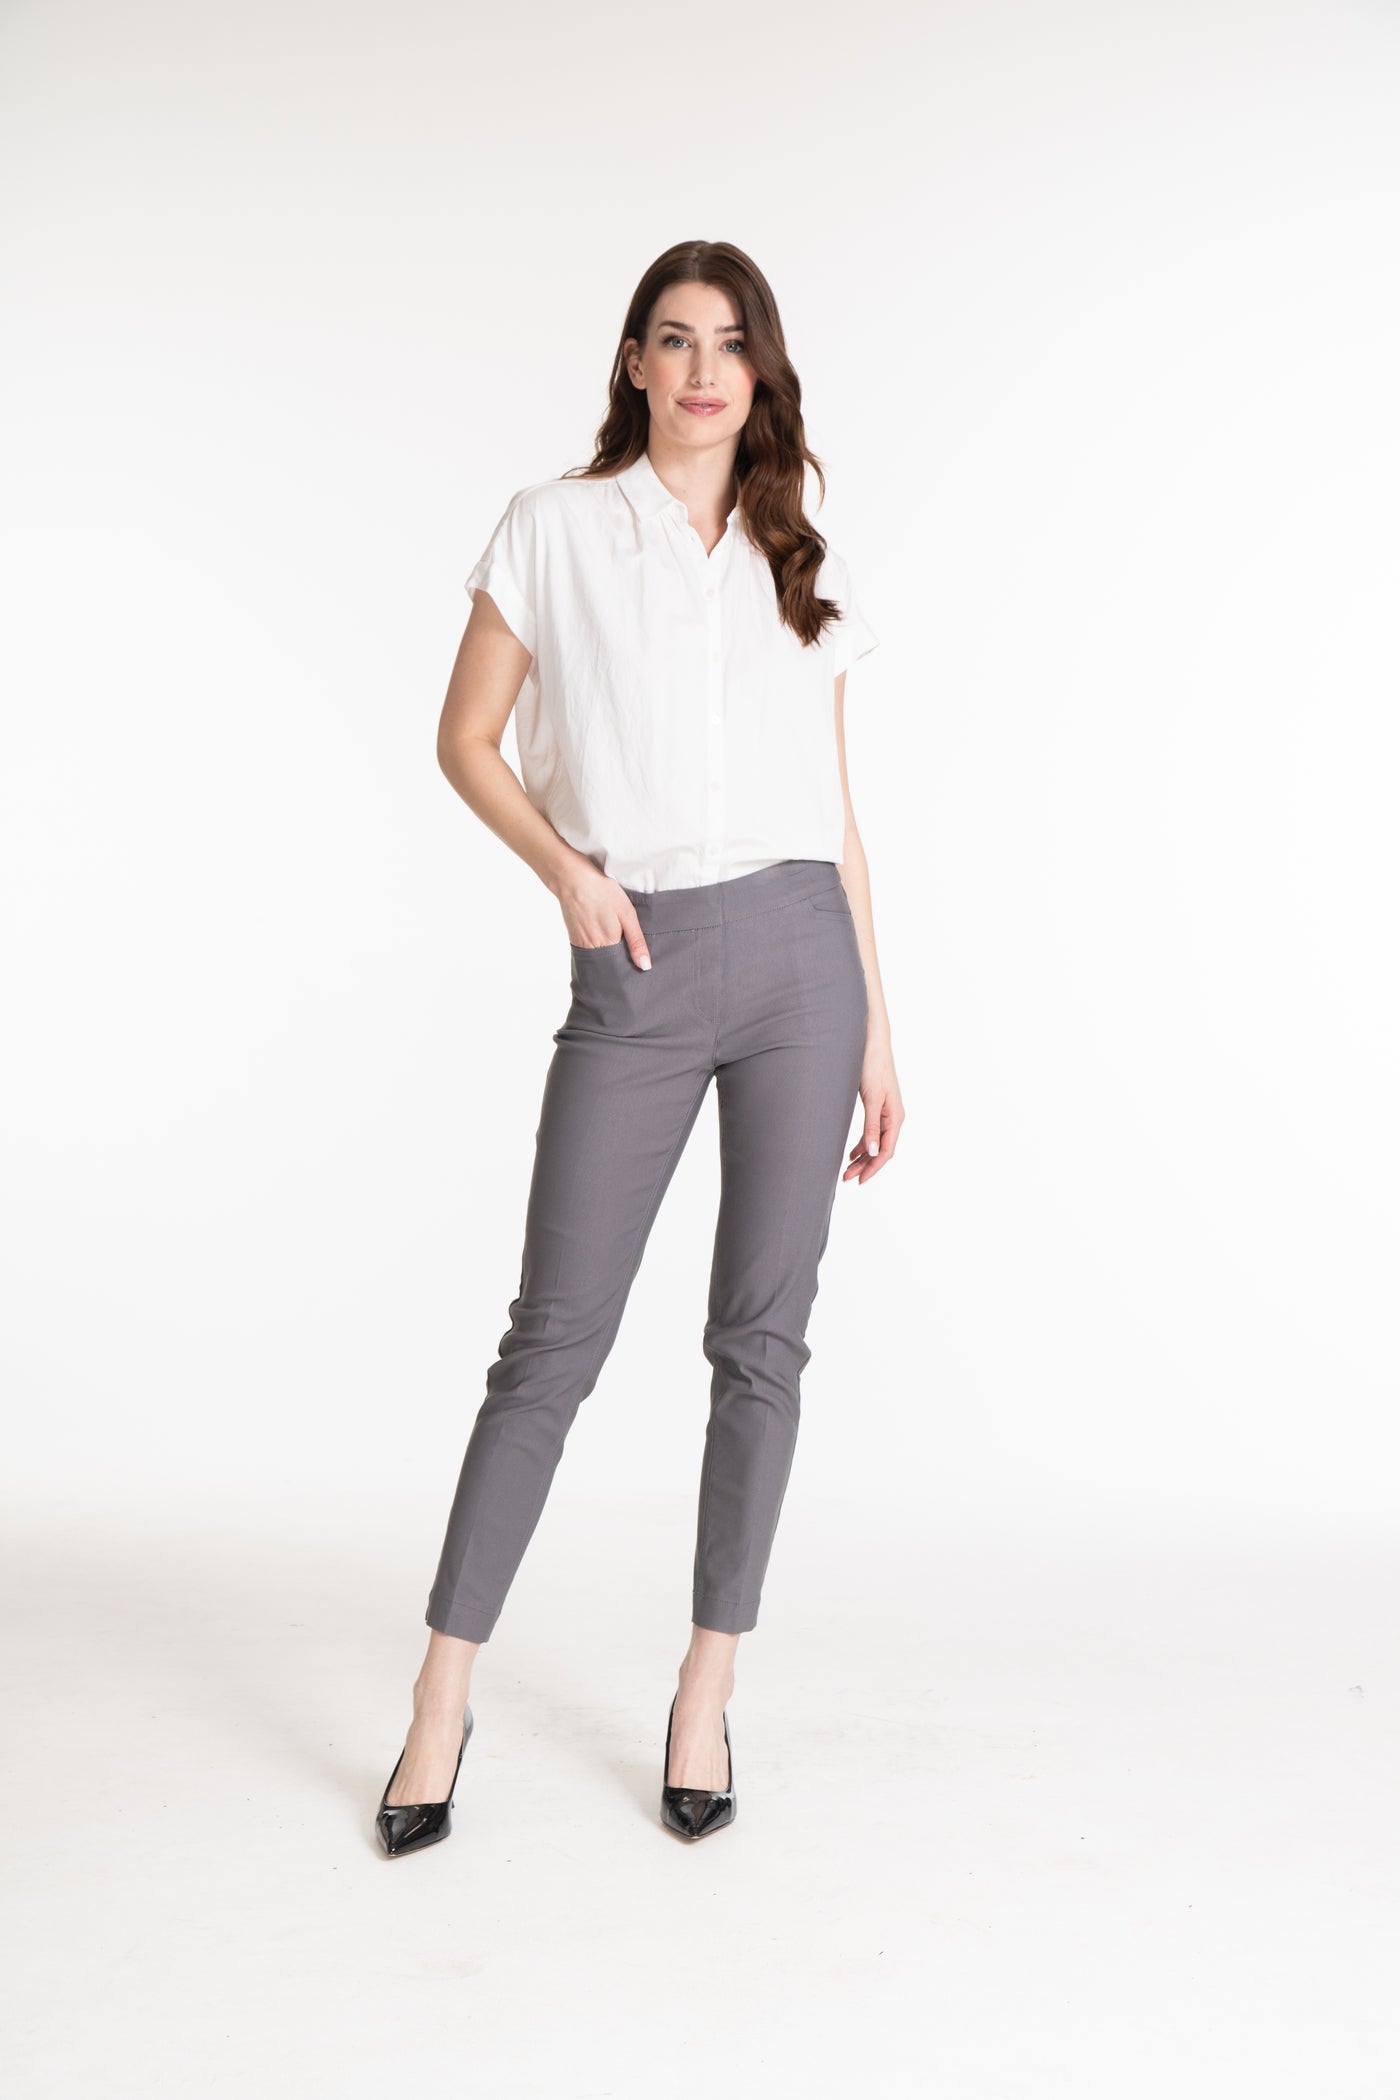 PULL-ON ANKLE PANT WITH REAL FRONT AND BACK POCKETS - Dark Charcoal